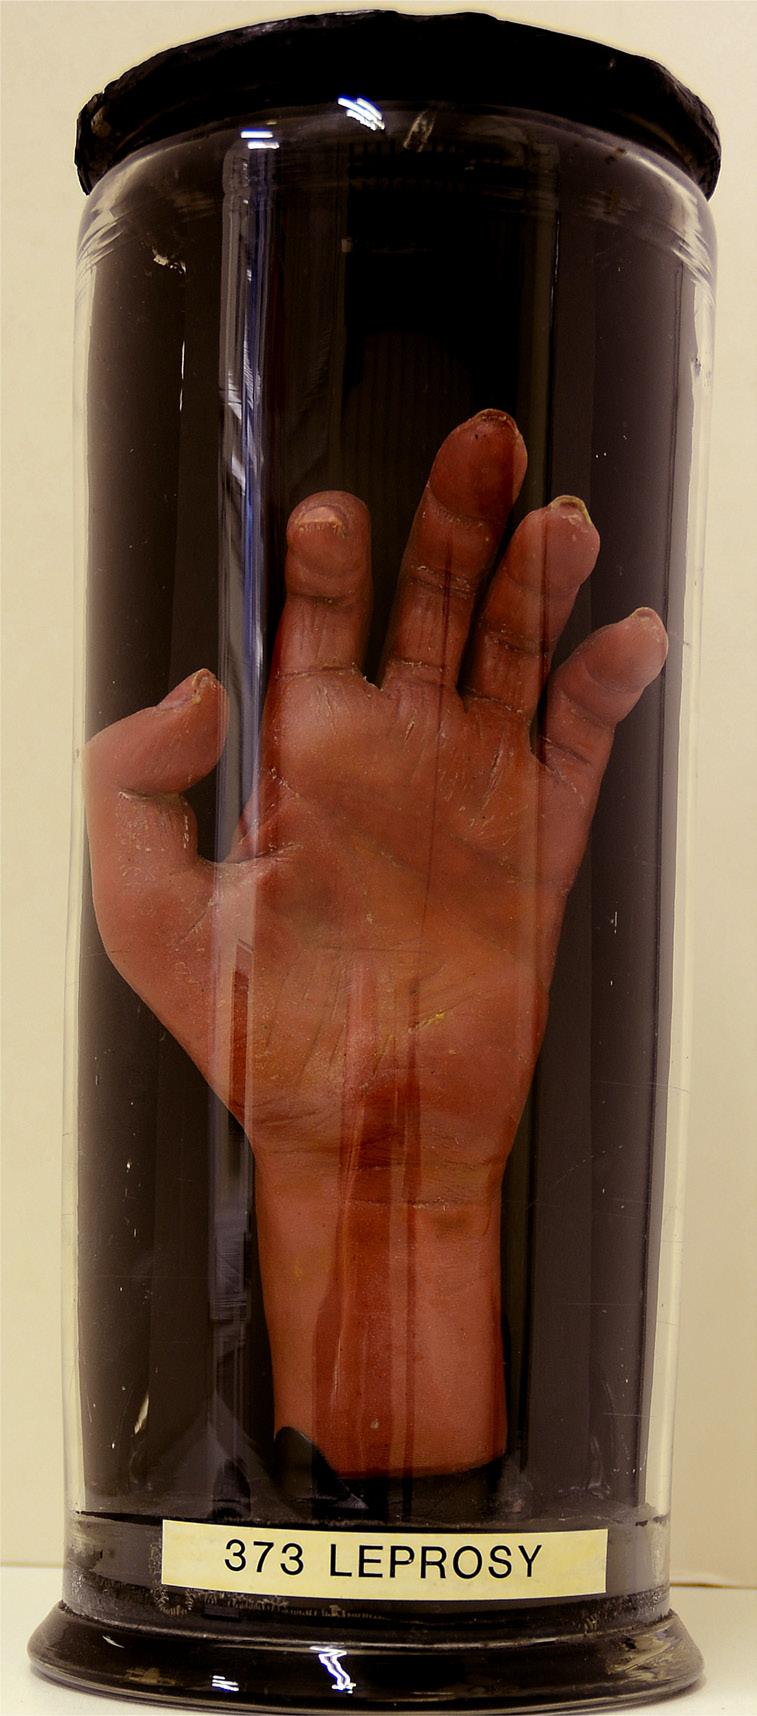 9 Fig. 5: Joseph Towne, Hand showing leprosy from a clerk recently returned from Trinidad, 1859. No. 373, Gordon Museum, King s College London.